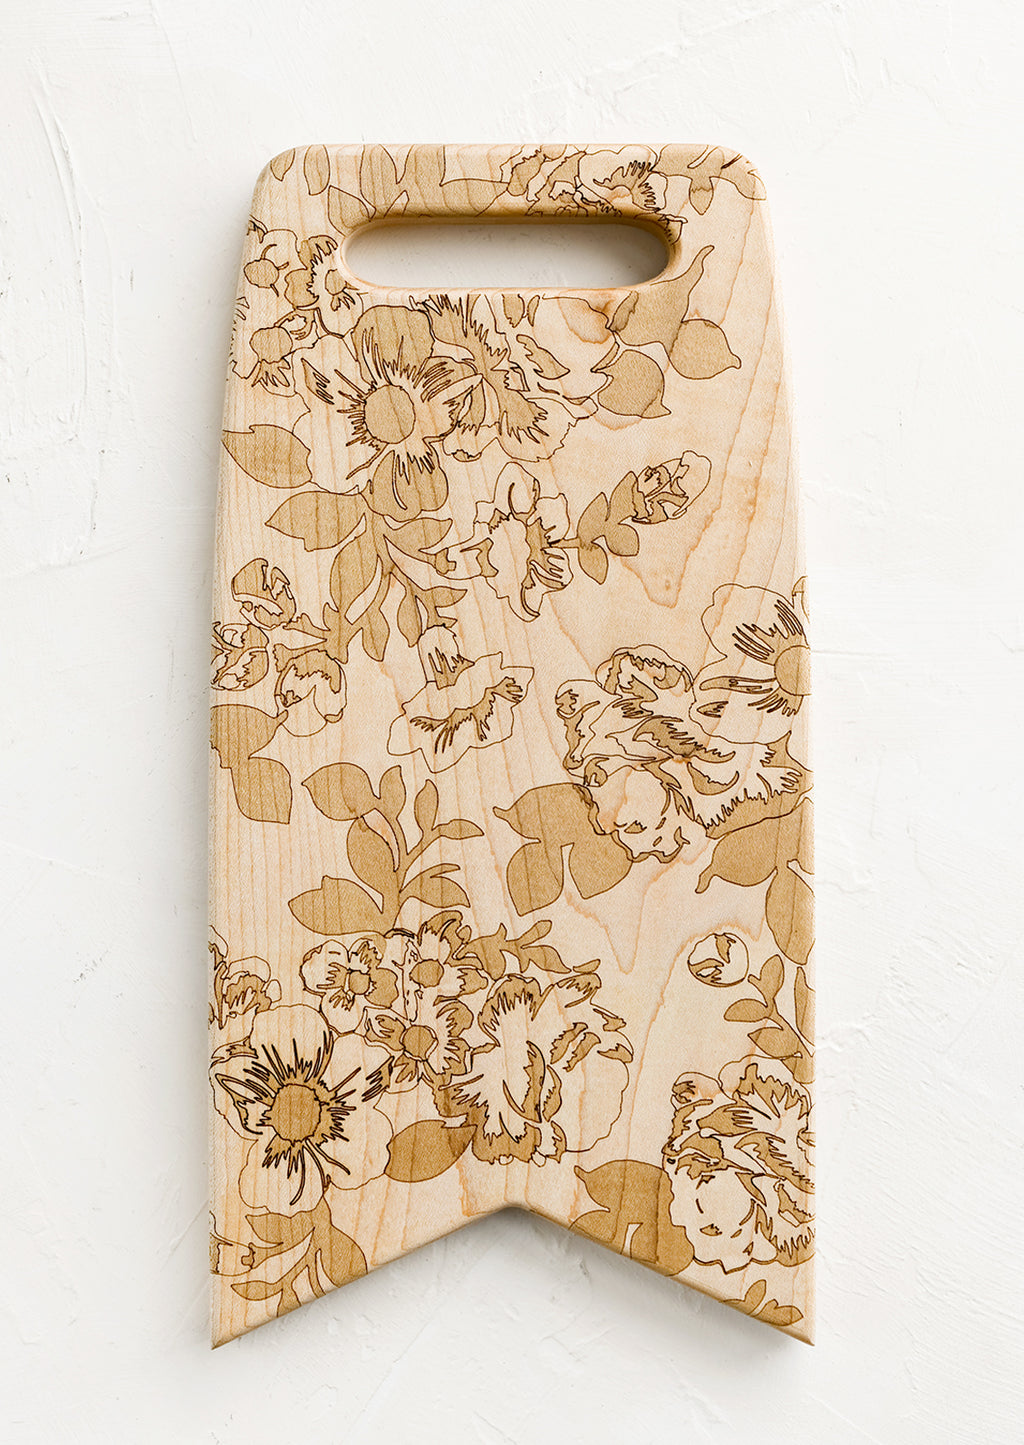 1: Flag shaped maplewood cutting board with handle cutout, lasercut floral pattern